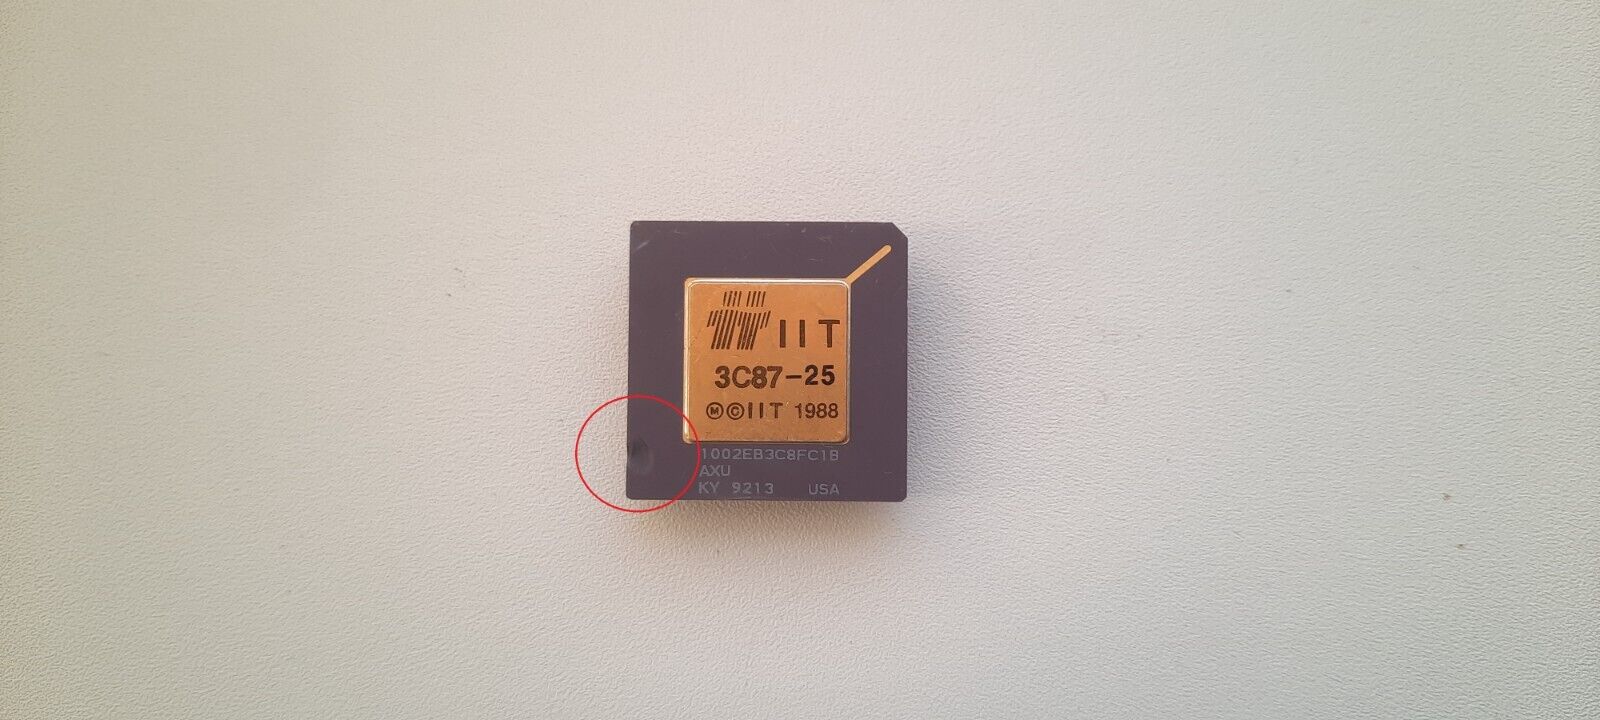 IIT 3C87-25 387 FPU for 386 CPU 25Mhz vintage FPU GOLD